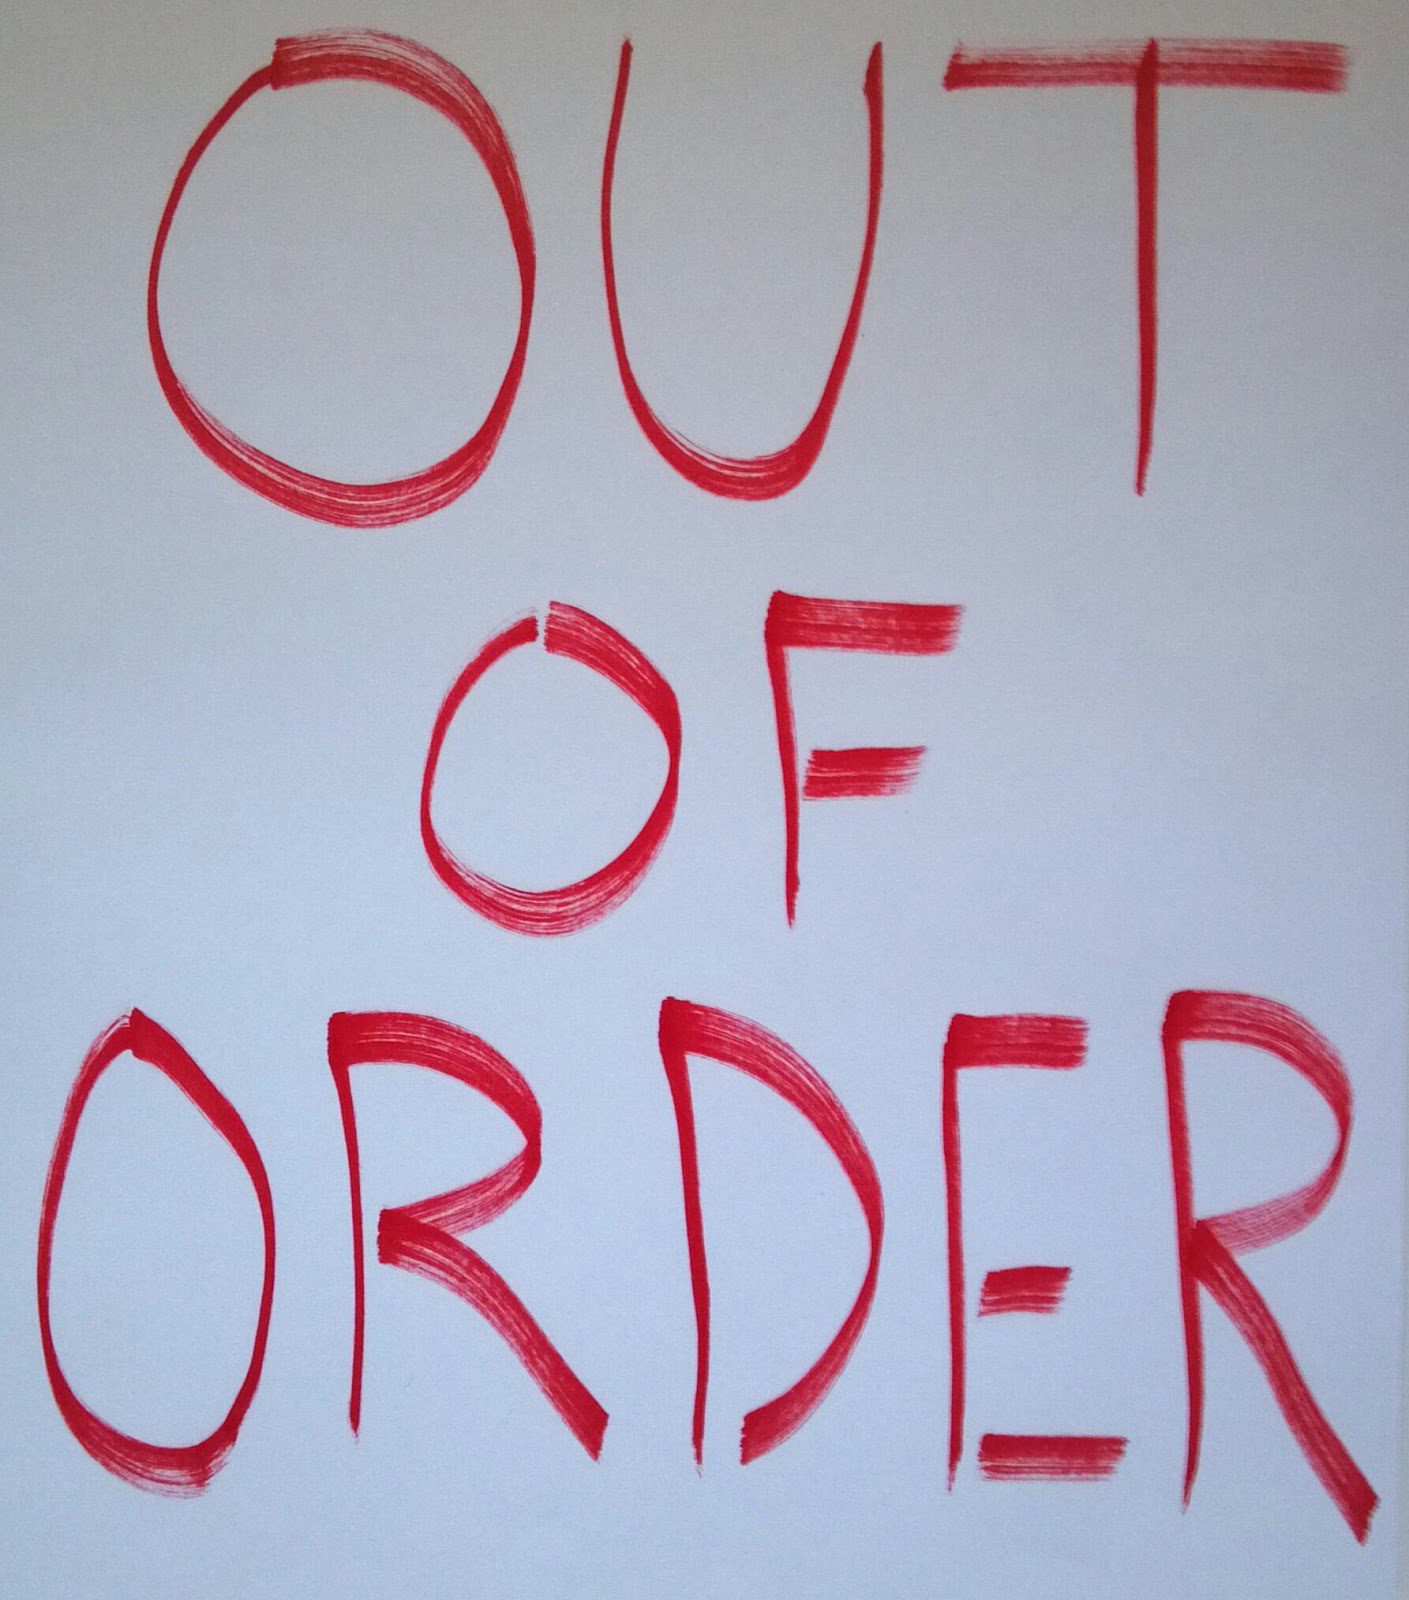 out-of-order